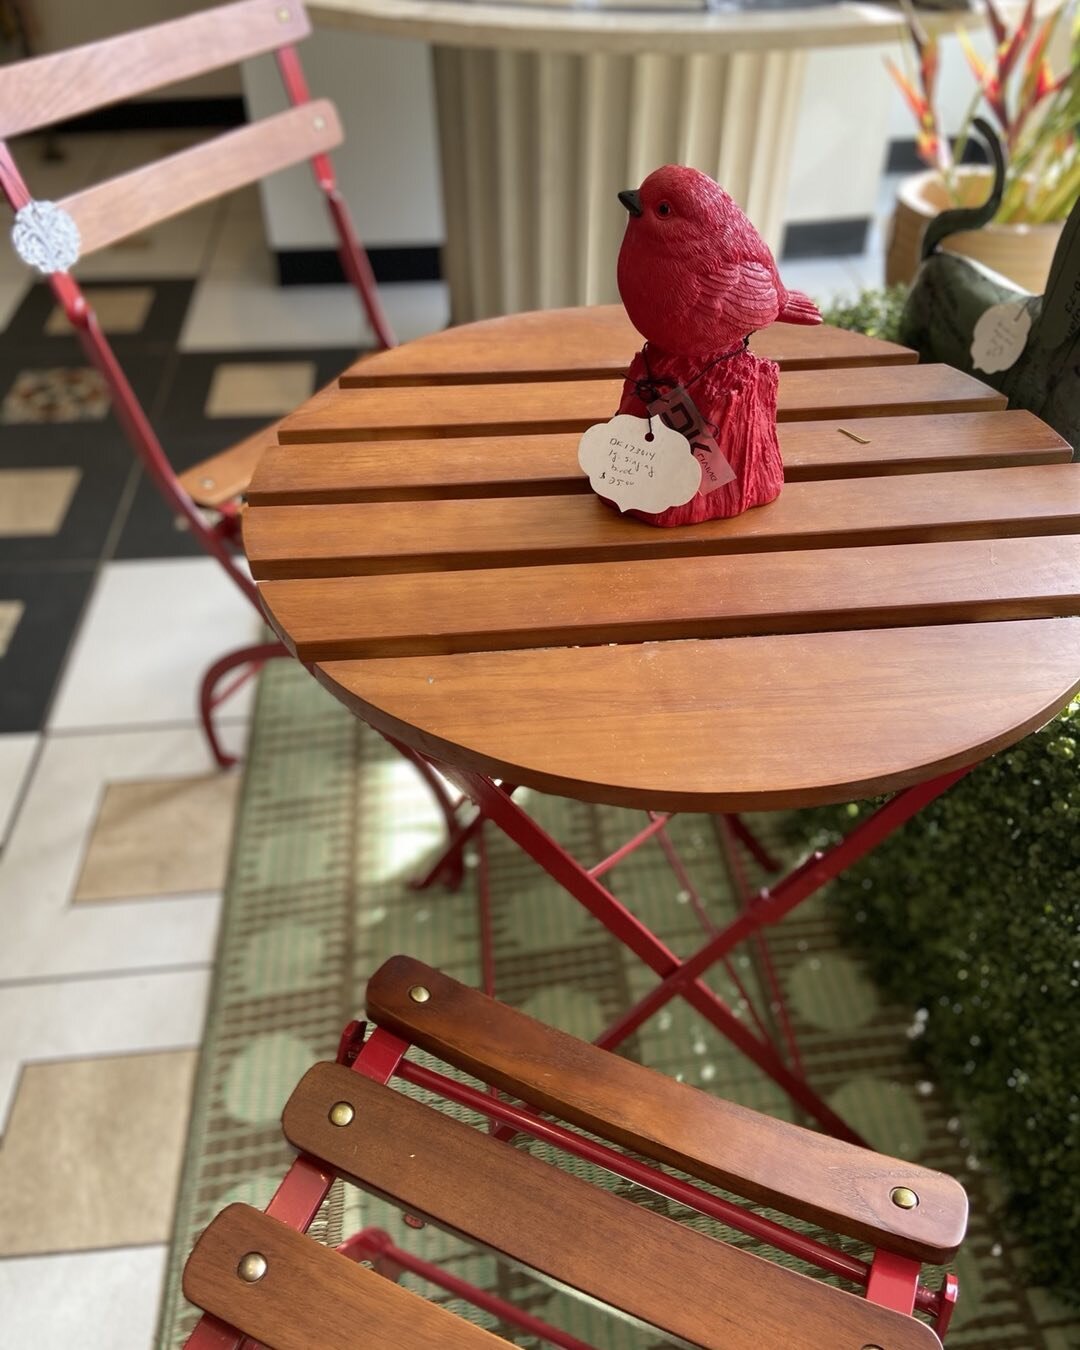 Well made Paris Bistro table comes with two Folding chairs we stock in many colors yellow ,red ,green. blue , and black Can mix-and-match for fun 23 inches wide . great for small patios. $ 175 set 1 table 2 chairs, #gardentable, #patiofurniture, #sma